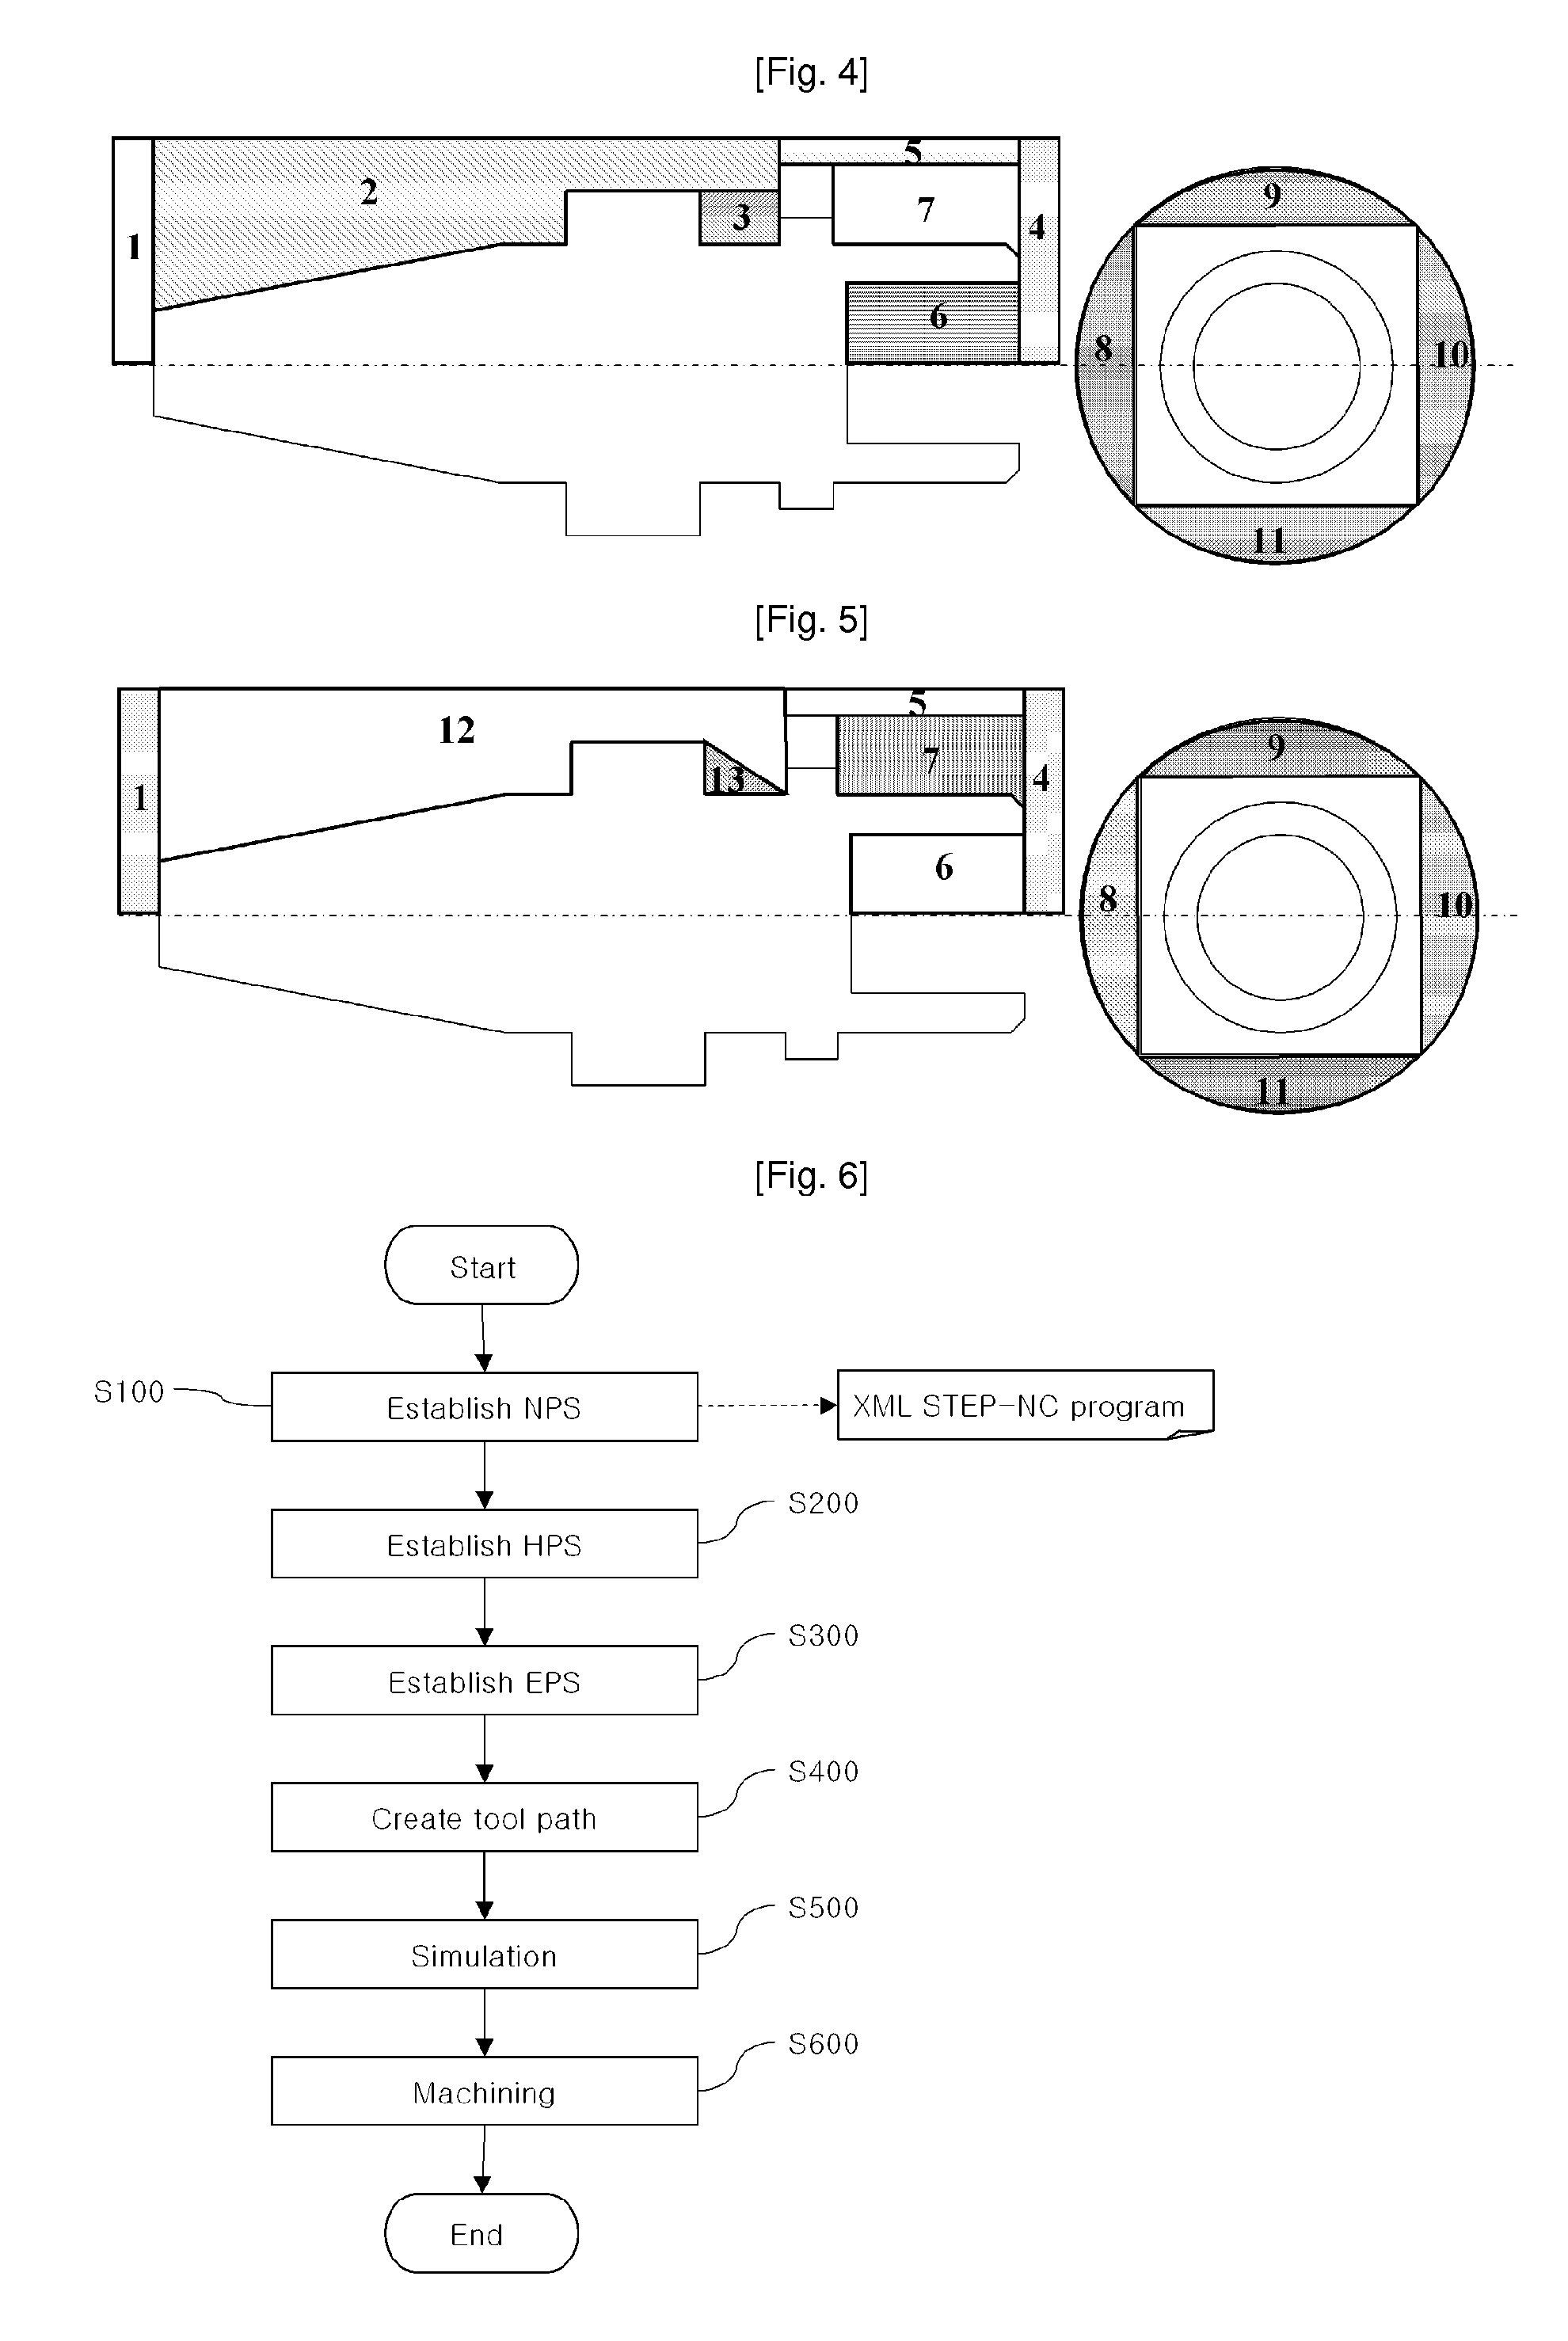 Method of Non-Linear Process Planning and Internet-Based Step-Nc System Using the Same